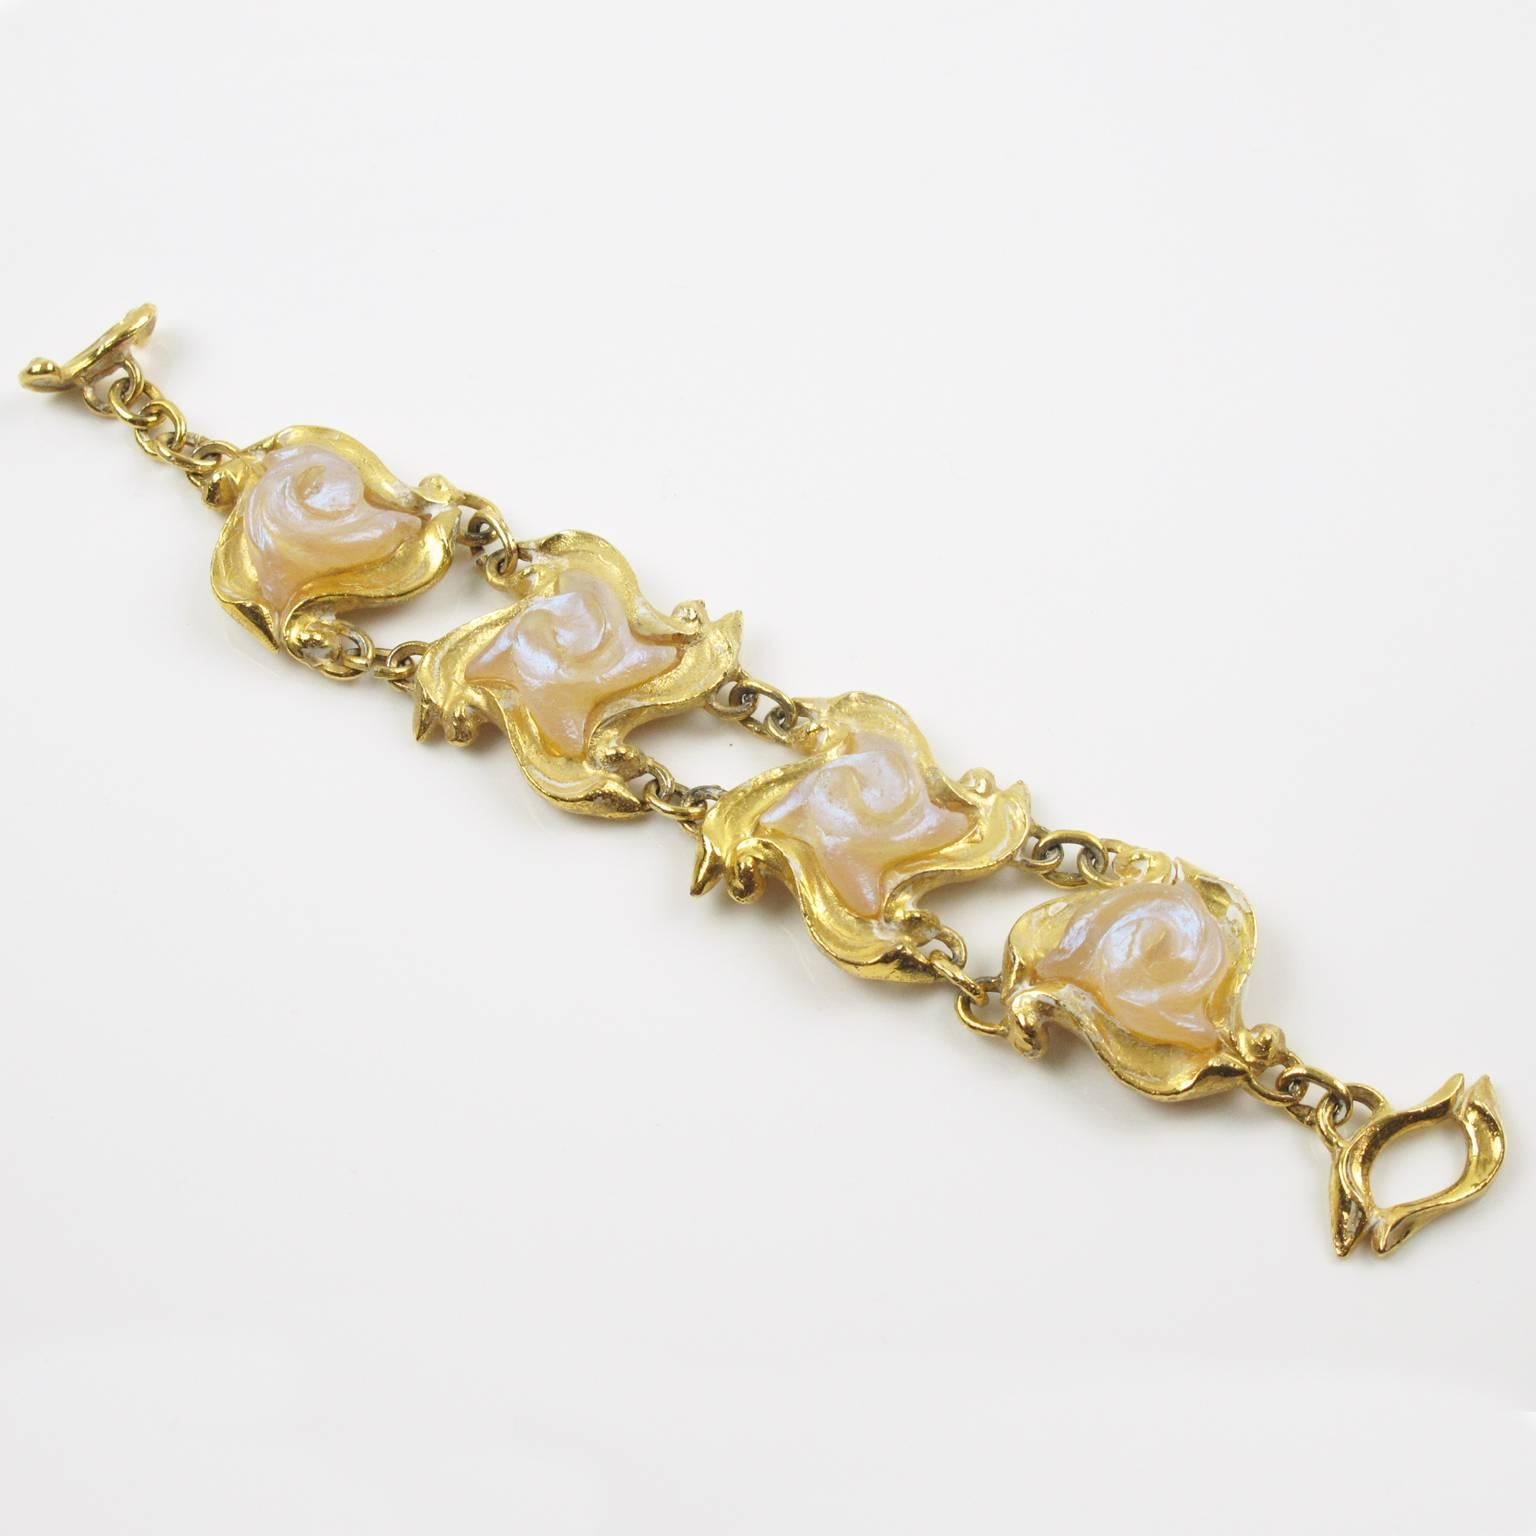 Vintage 1980s French designer L'Or Du Soir Paris signed link bracelet. Byzantine inspired design with gilt metal links topped with frosted champagne floral resin cabochon with iridescent overtone. High end quality with gorgeous detailed design with